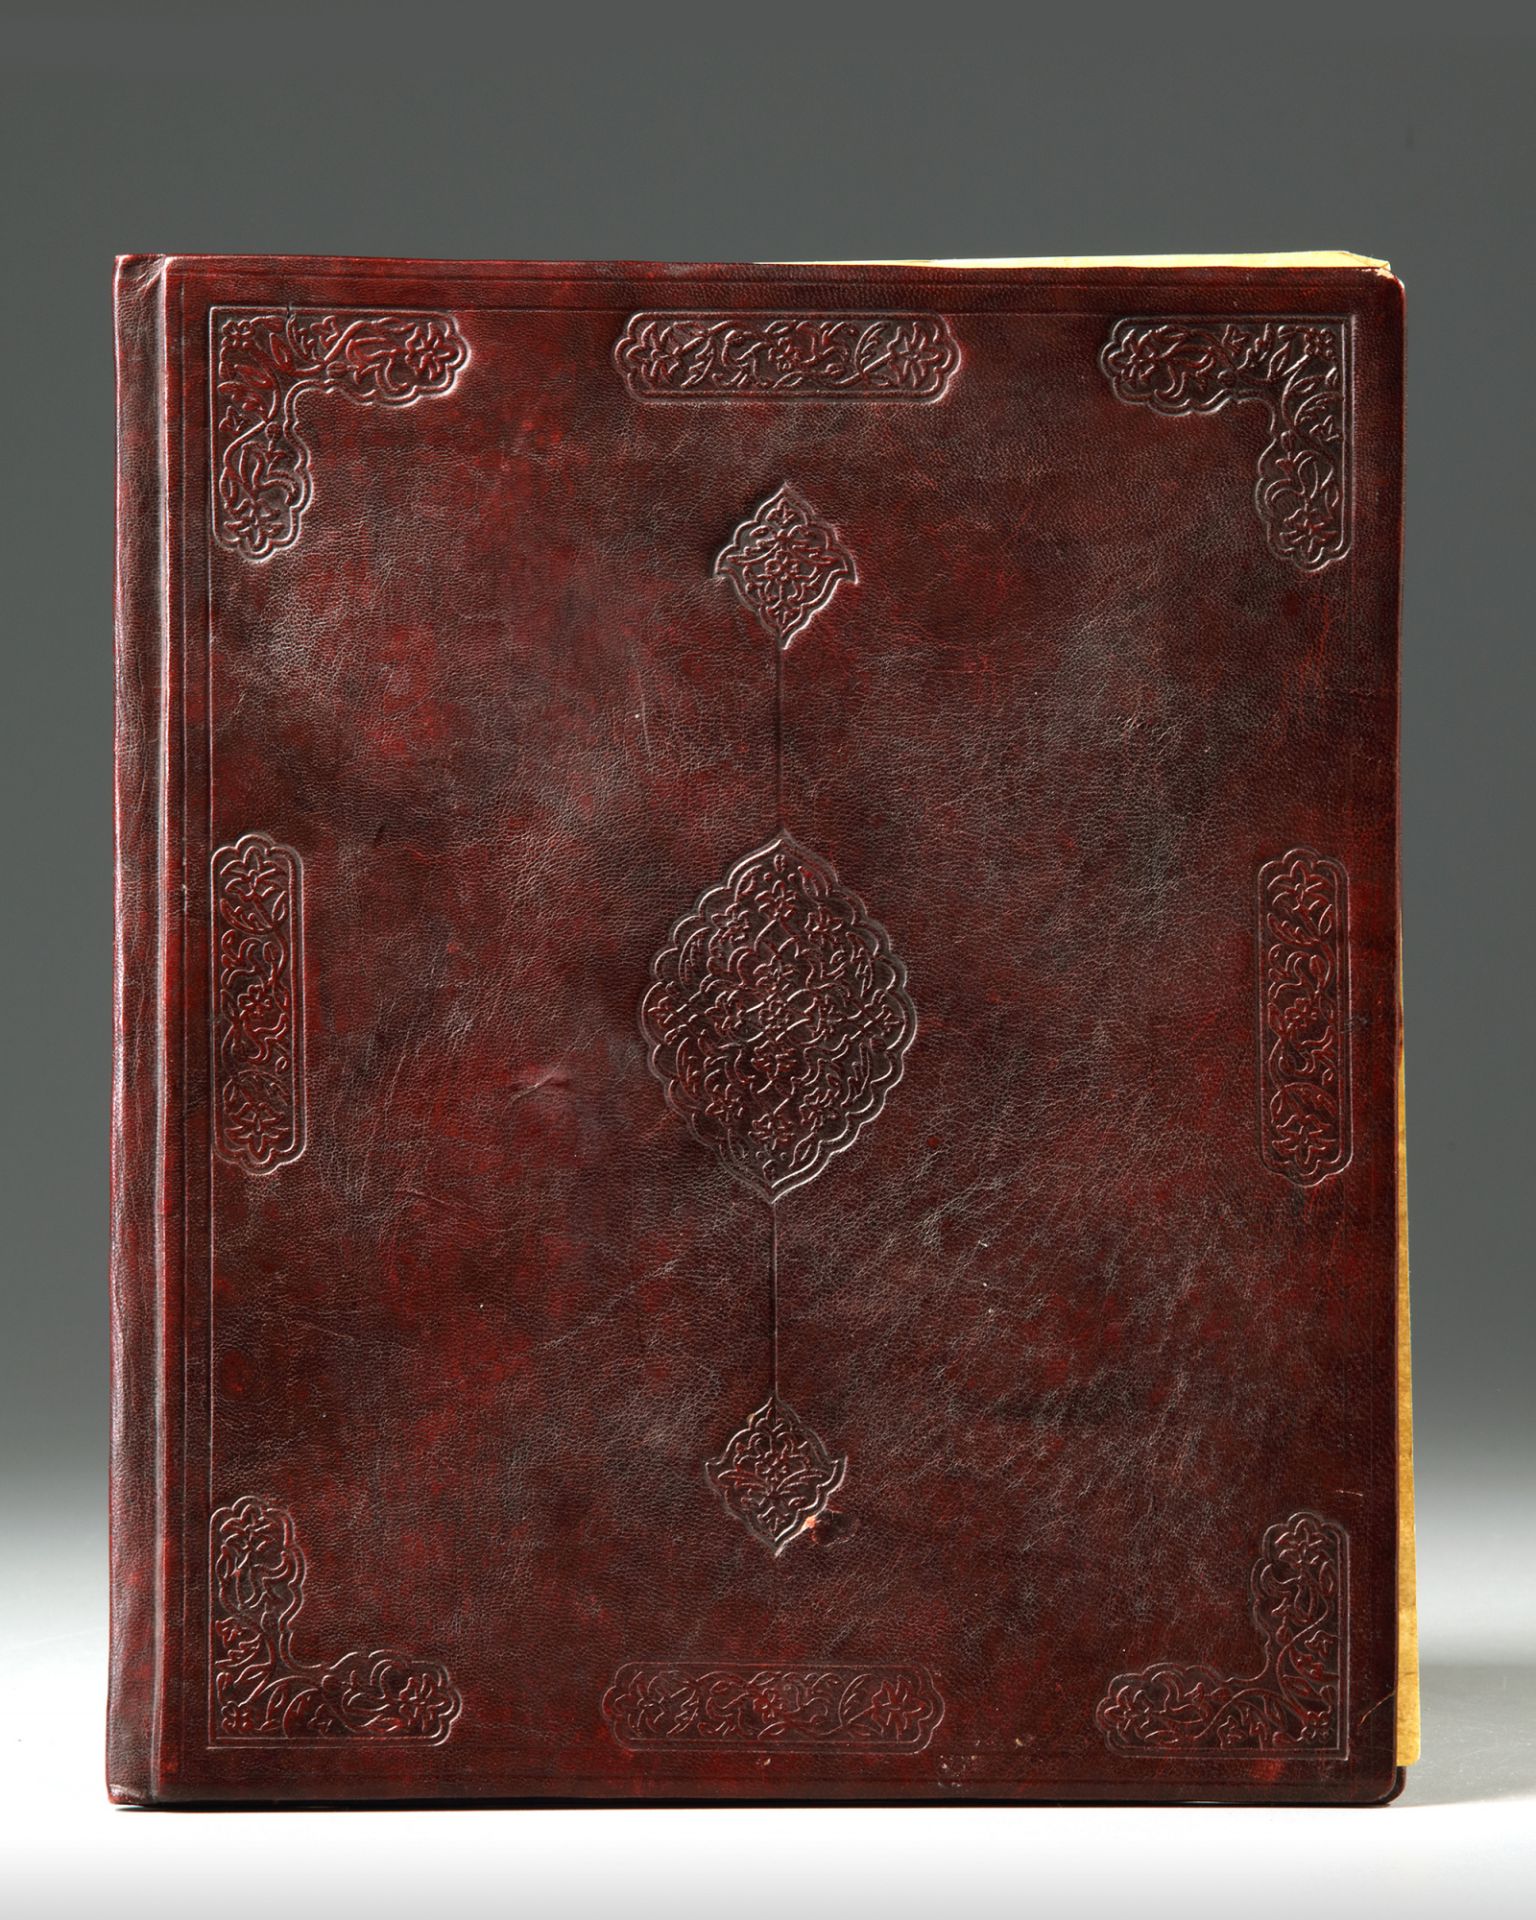 A LEATHER-BOUND BOOK WITH ISLAMIC TRANSCRIPTS - Image 3 of 3